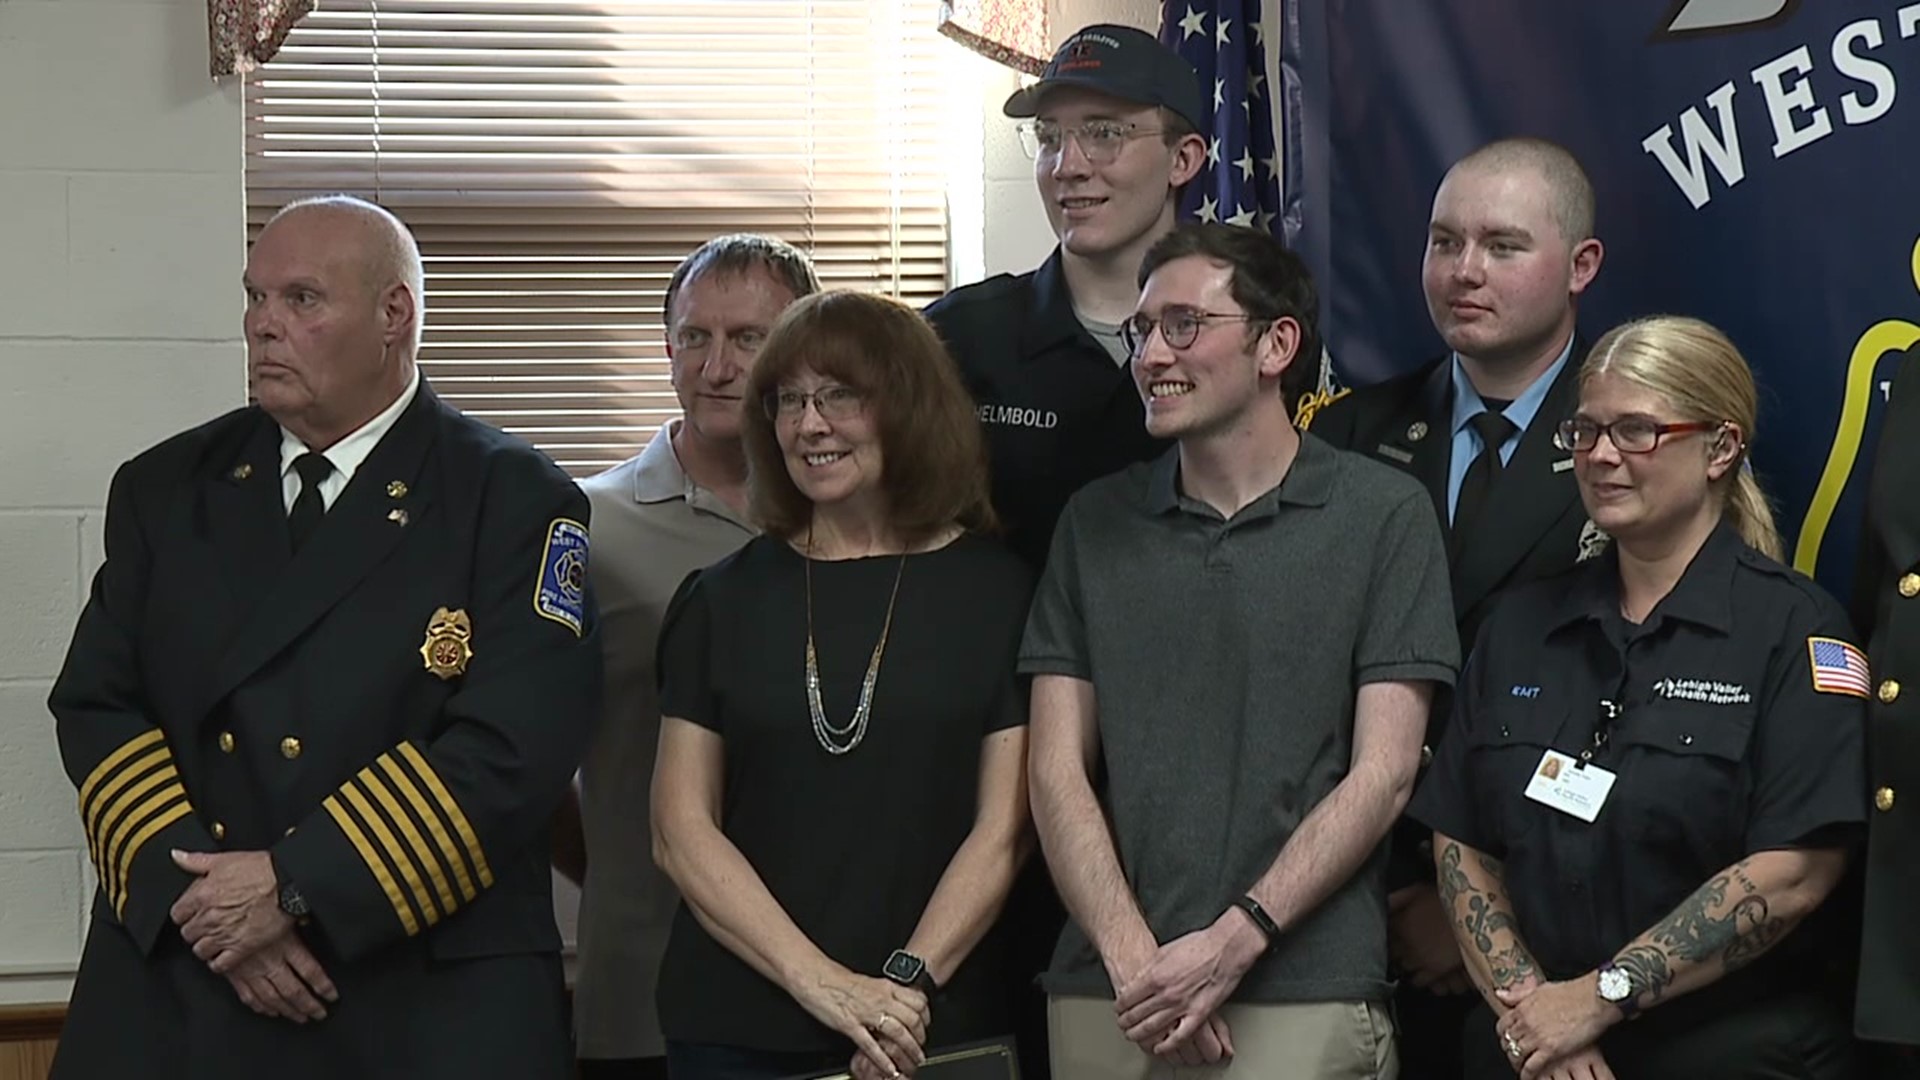 Emergency crews were honored for saving the life of Brian Siroka, who went into cardiac arrest at his home after a run.